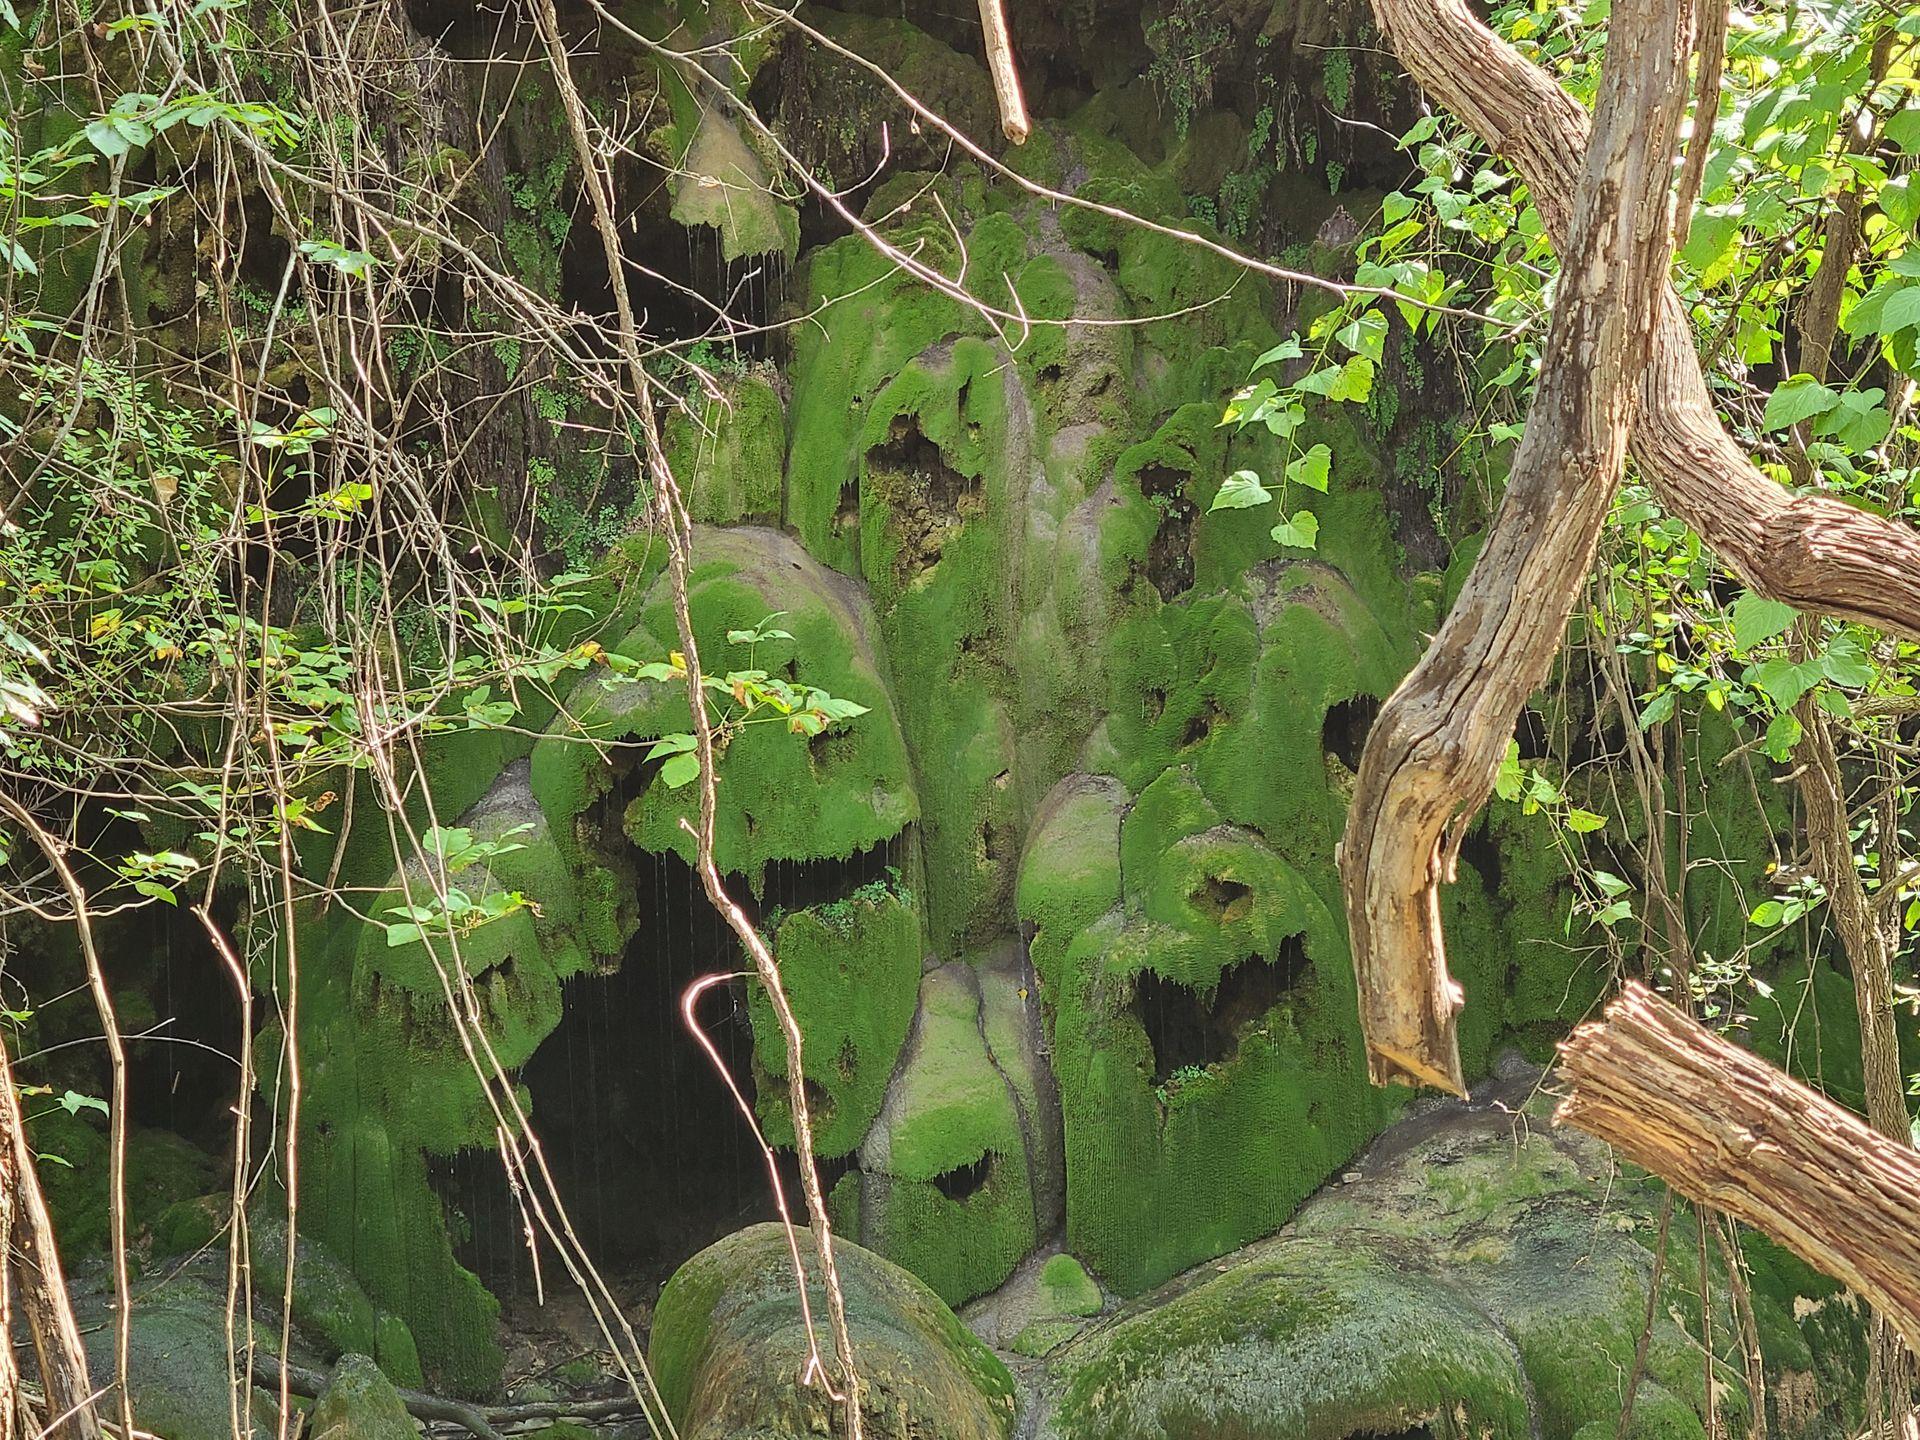 An area of rocks covered in green moss at Gorman Falls.